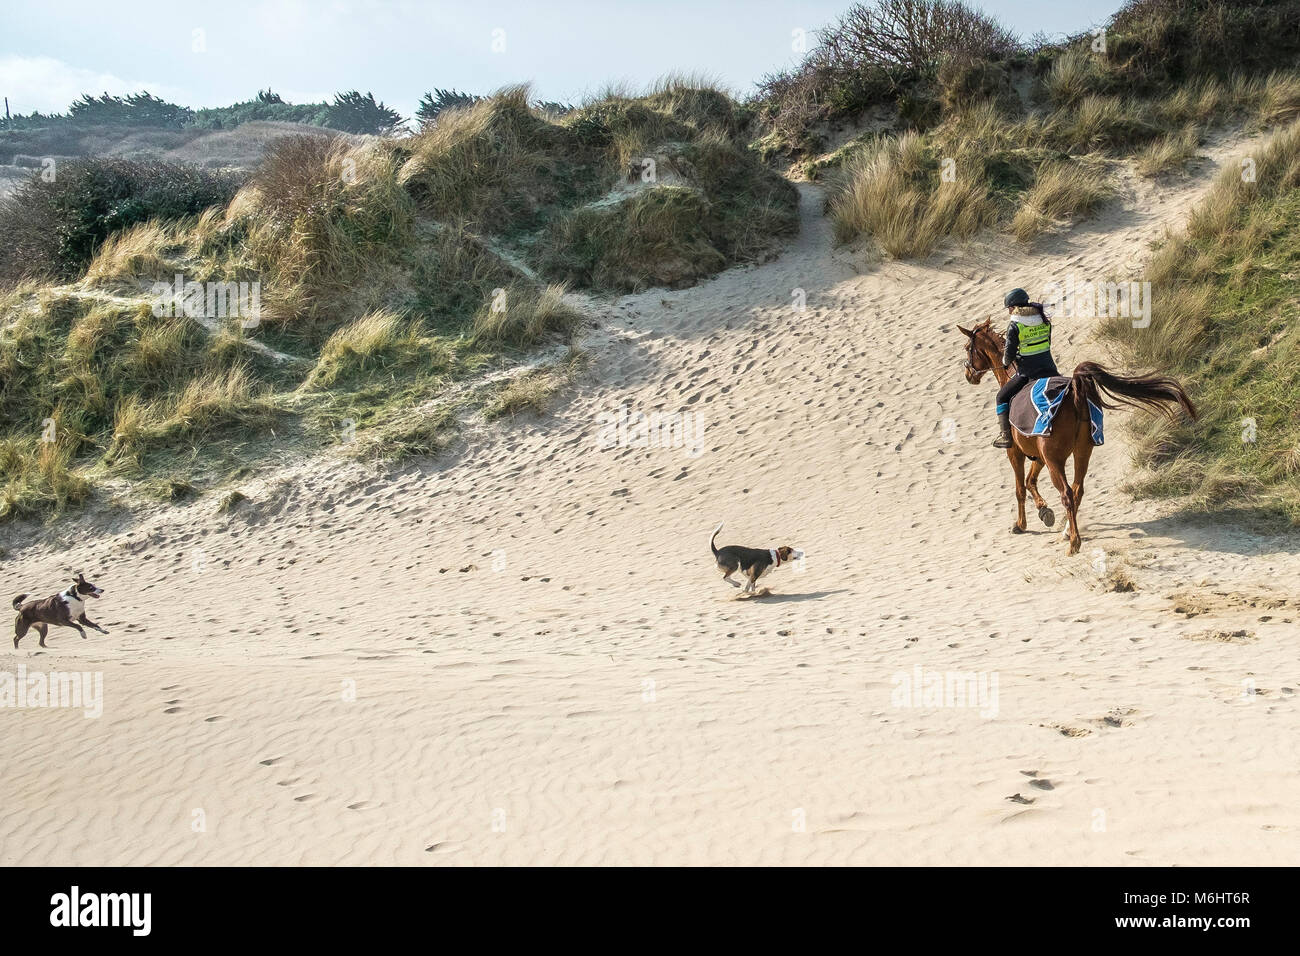 Dogs off the lead running at a horse rider in the sand dunes at Crantock in Newquay Cornwall. Stock Photo